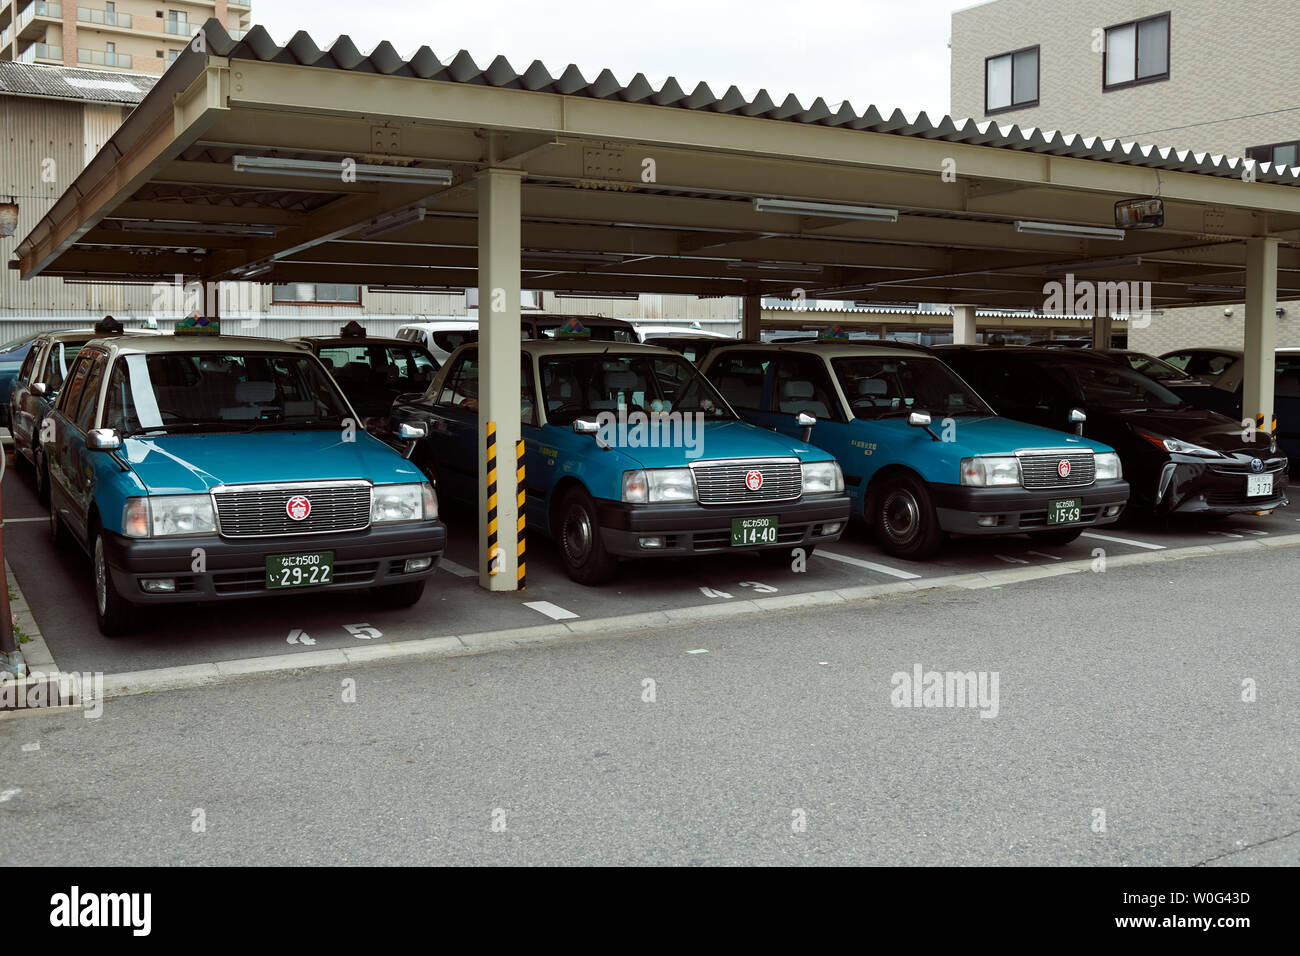 Taxistand Stockfoto